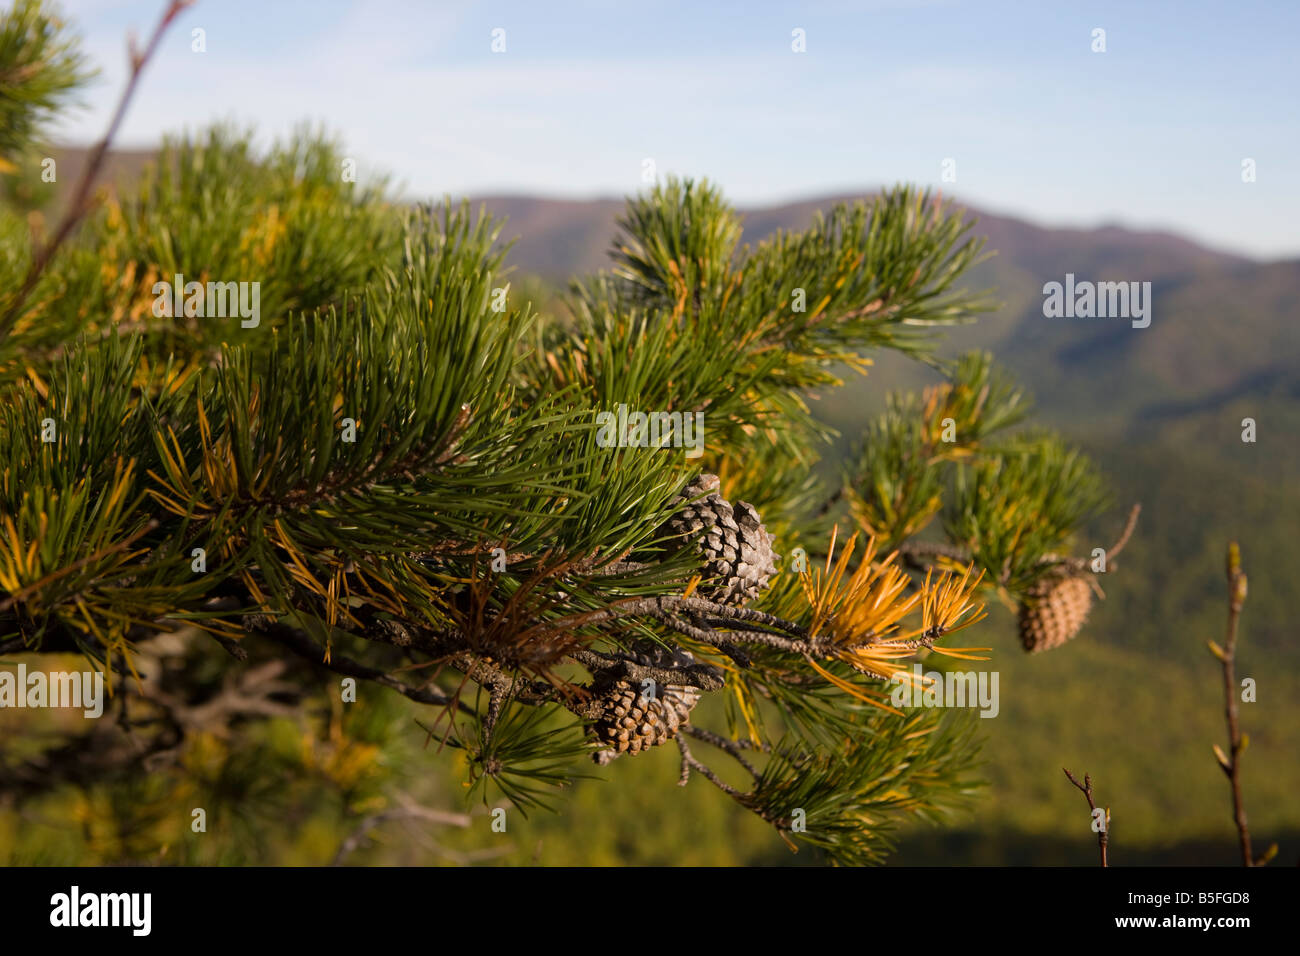 A pine tree branch with pine cones in front of mountains, Old Rag Mountain, Shenandoah National Park, Virginia. Stock Photo